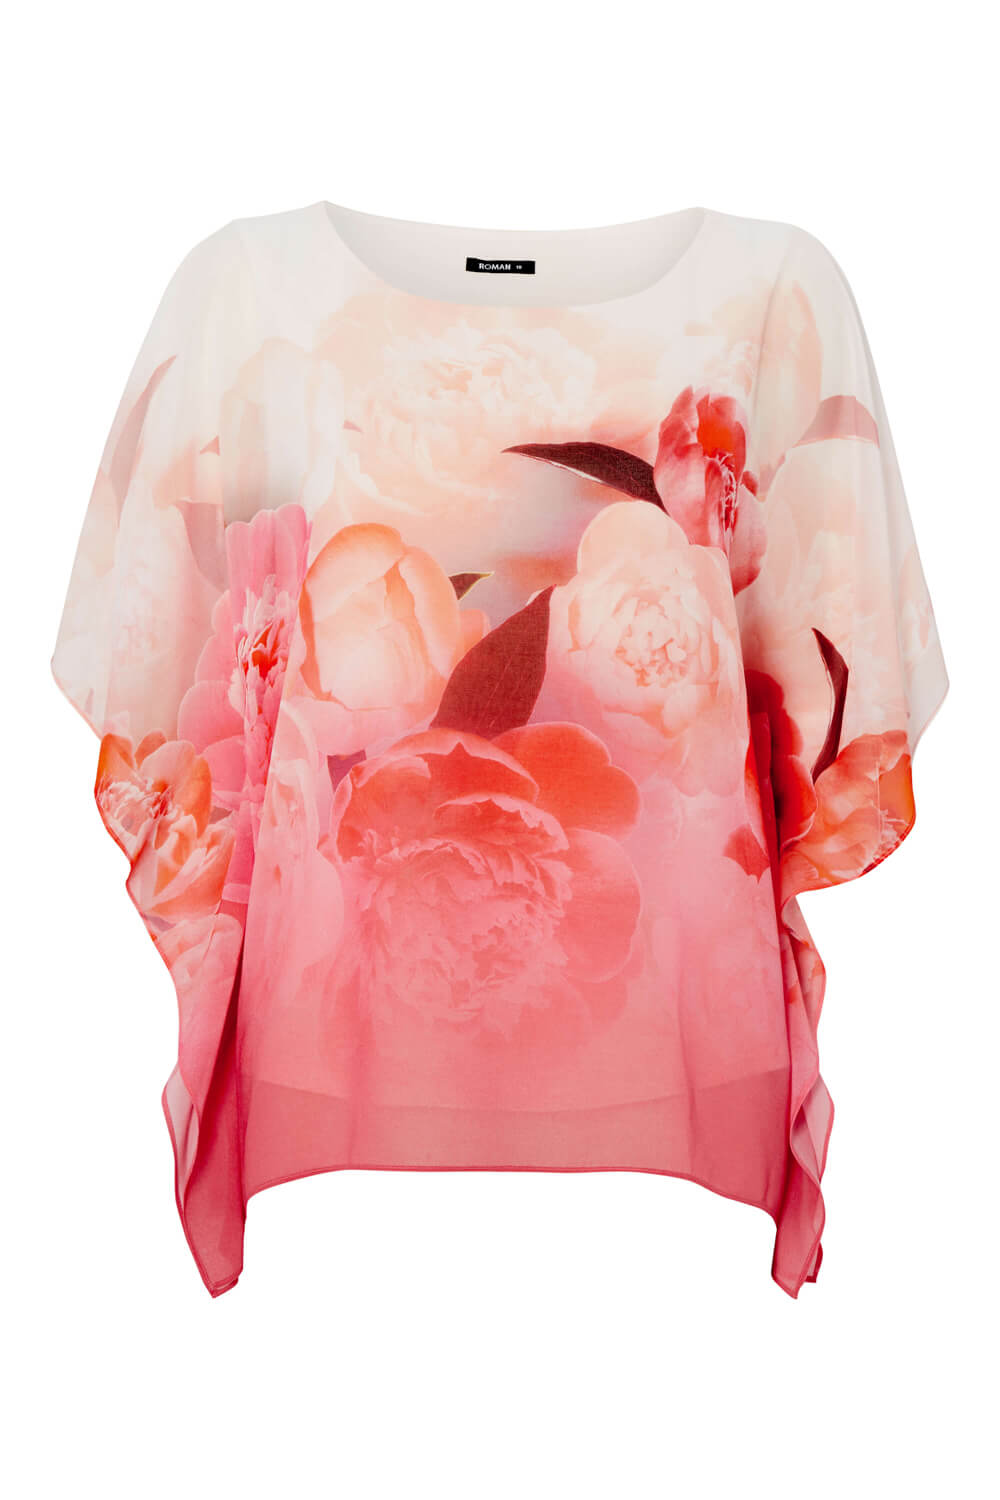 PINK Floral Chiffon Overlay Top, Image 3 of 3